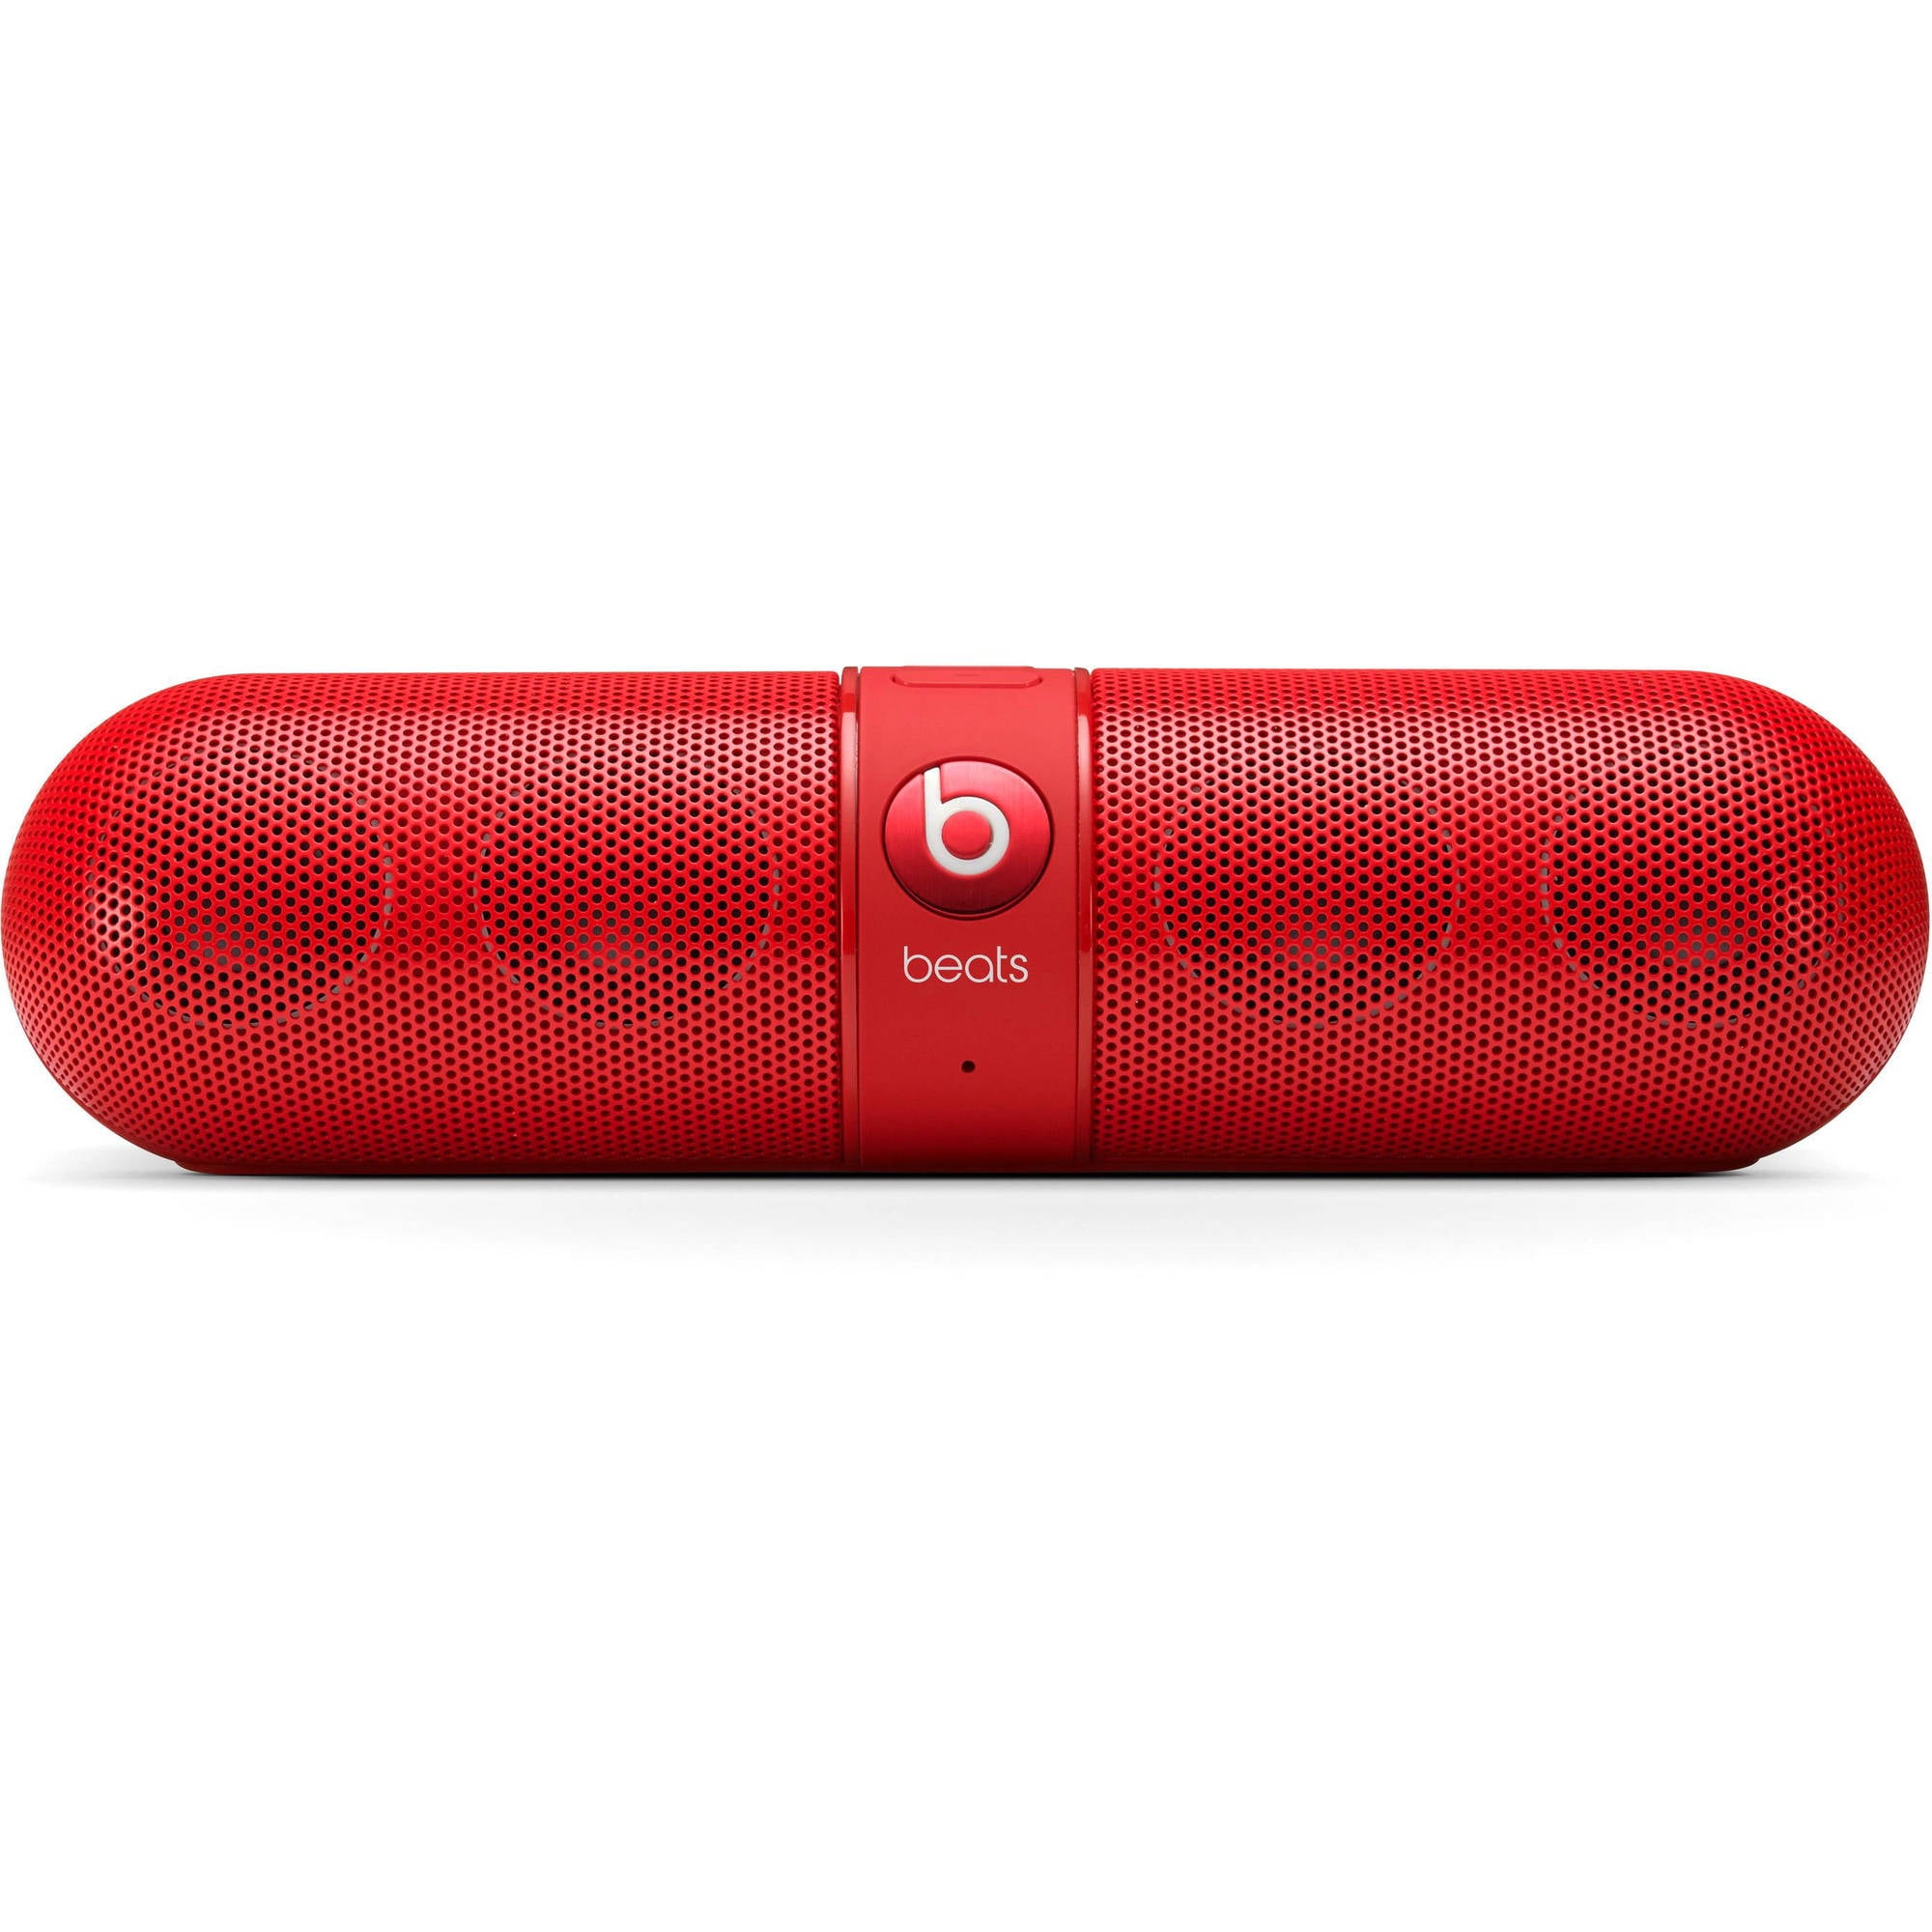 is the beats pill worth it